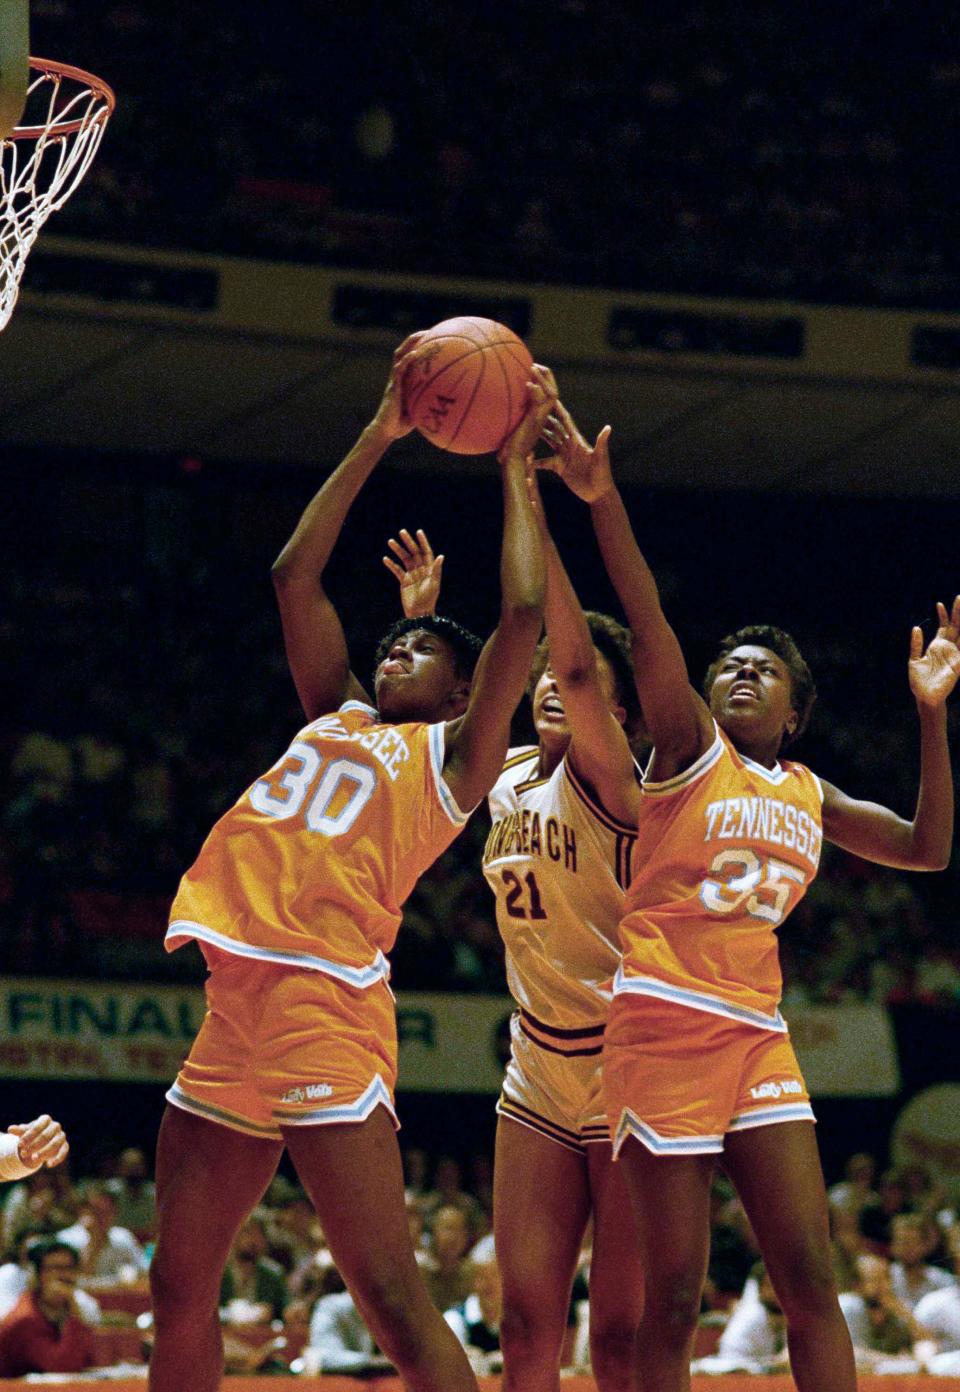 FILE - In this March 27, 1987, file photo, Bridgette Gordon (30) and Melissa McCray (35) of Tennessee double team Shannon Smith (21) of Cal State Long Beach as they go for a rebound during the first half of the NCAA Women's Final four semifinals in Austin, Texas. Bridgette Gordon starred on two of Tennessee's national championship teams and reached the Final Four each of her four seasons with the Lady Volunteers. Now the U.S. Olympic gold medalist is back at her alma mater as an assistant coach trying to help Tennessee regain the prominence it enjoyed during her own playing career. (AP Photo/David Breslauer, File)